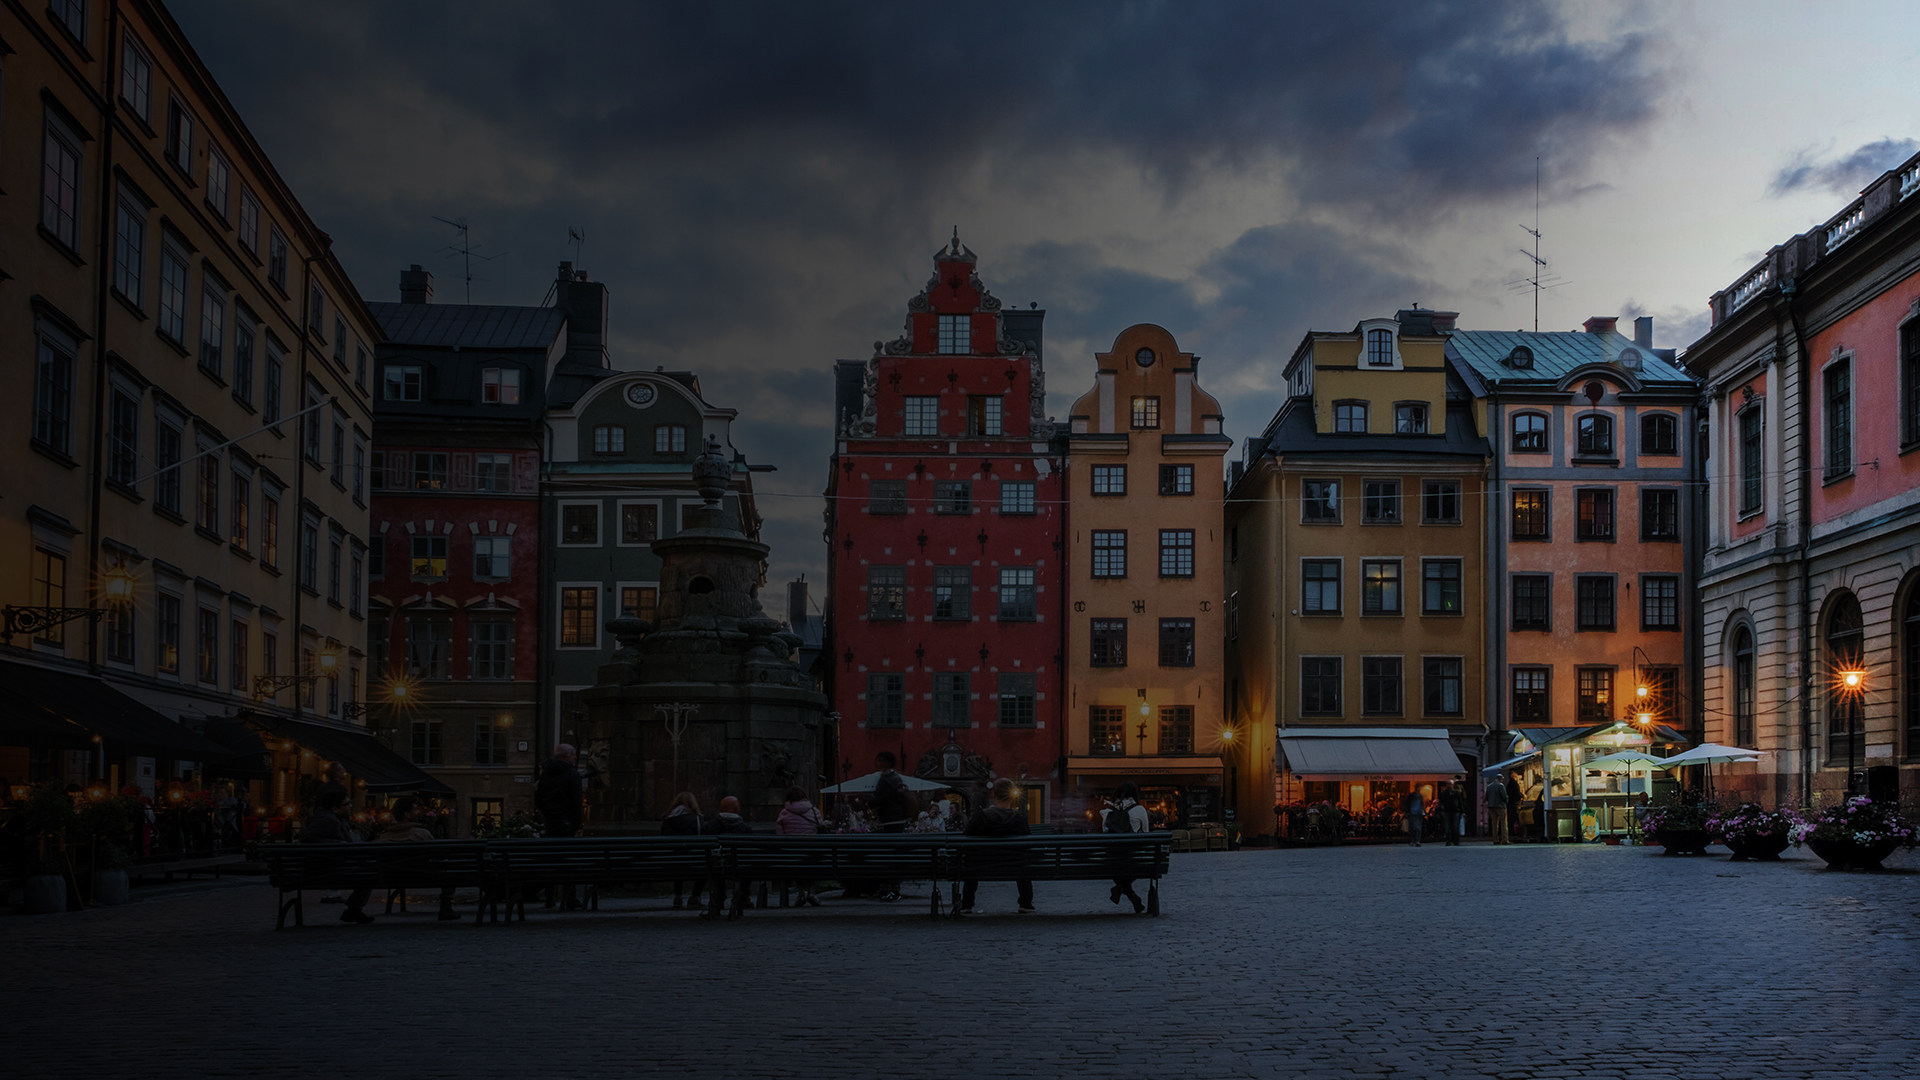 This is Stortorget Square in the middle of Stockholm's Gamla Stan (Old Town). The colorful building facades, fountain and famous cafés are a favourite for tourists and locals alike.